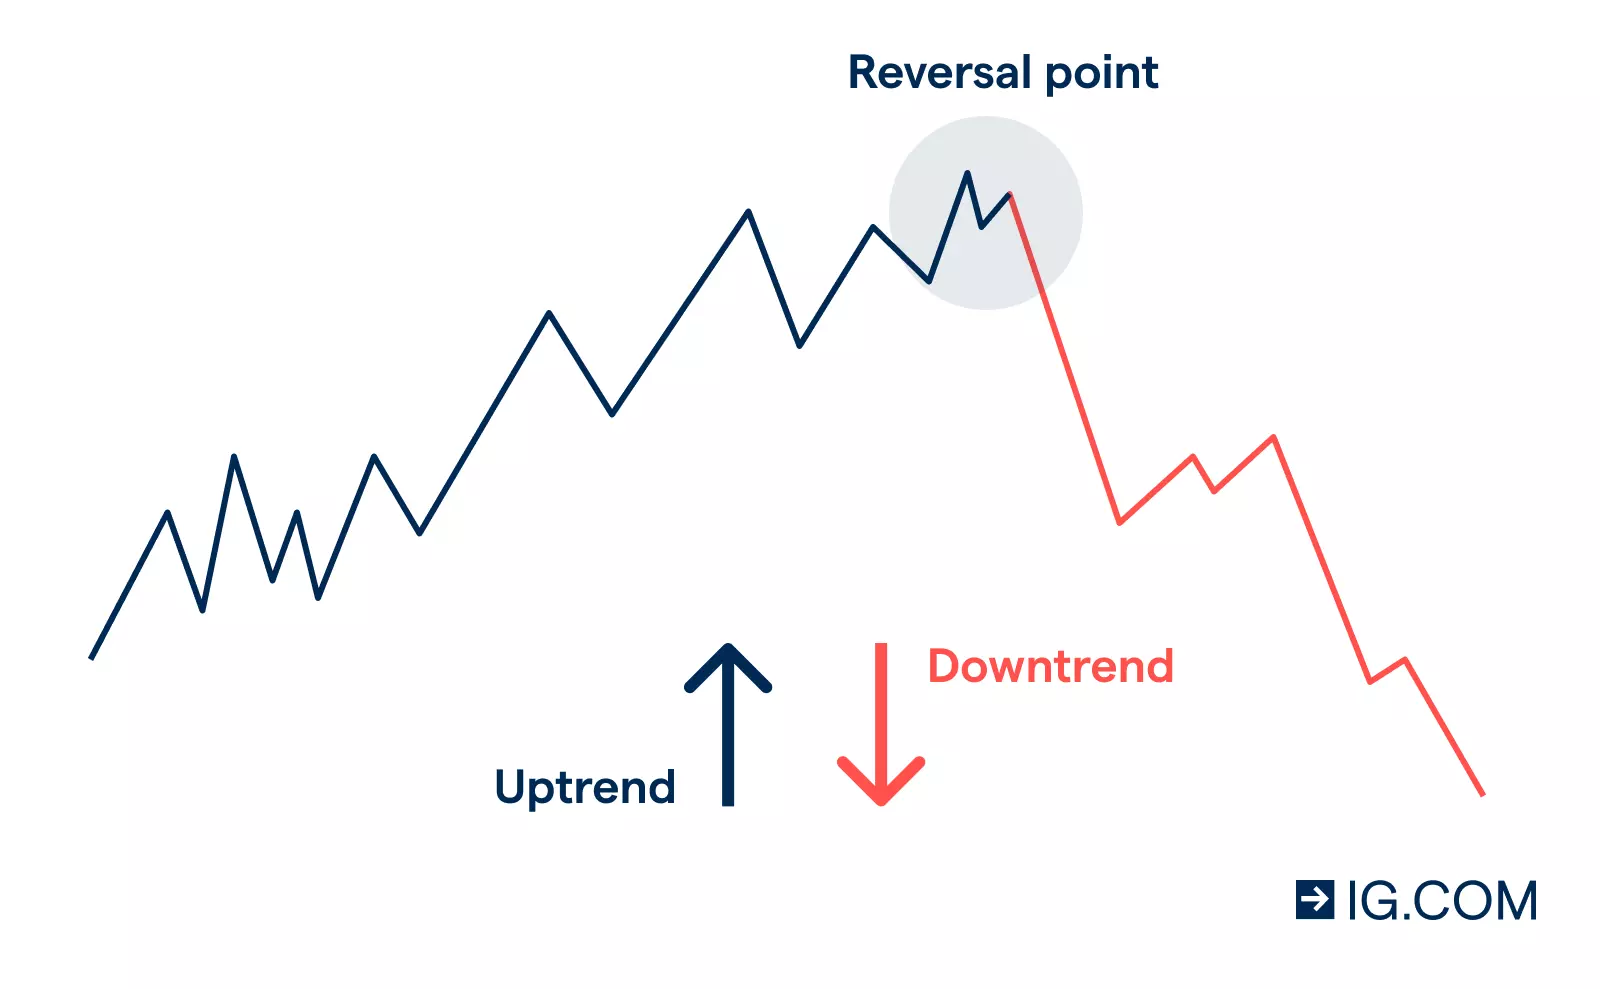 Example of a trend reversal in forex